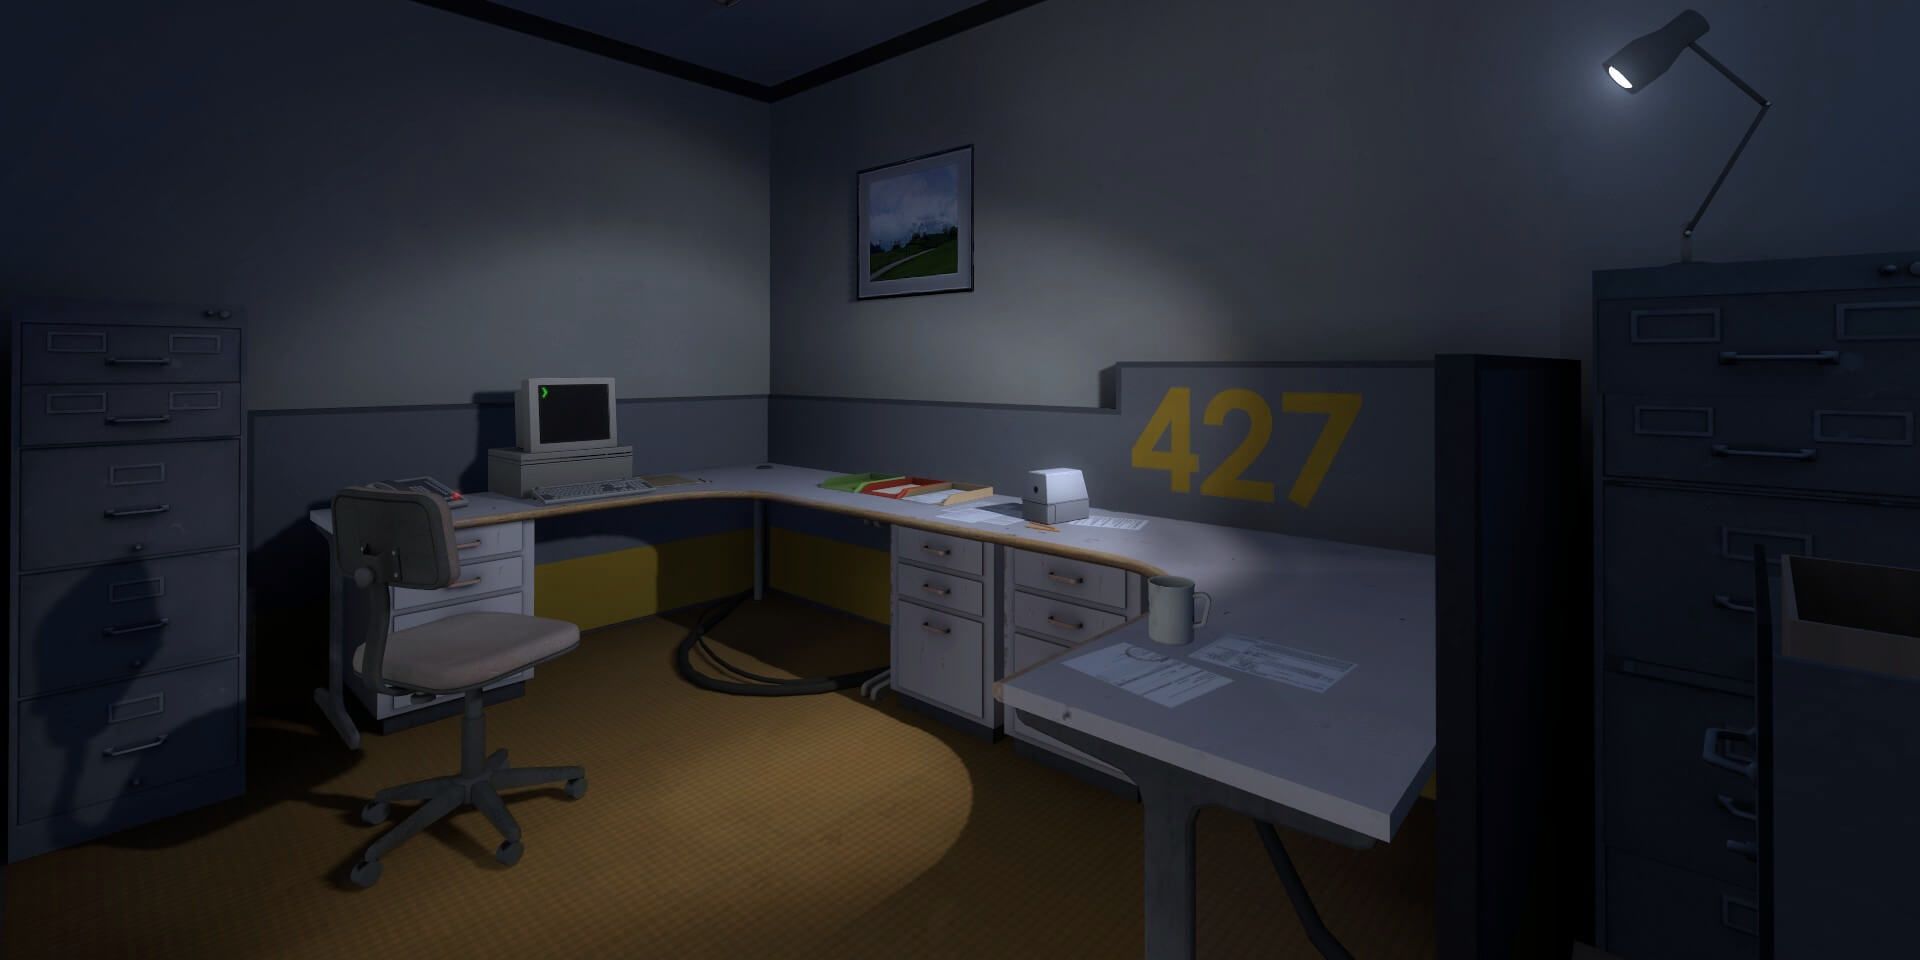 The office of employee 427, otherwise known as Stanley, in The Stanley Parable